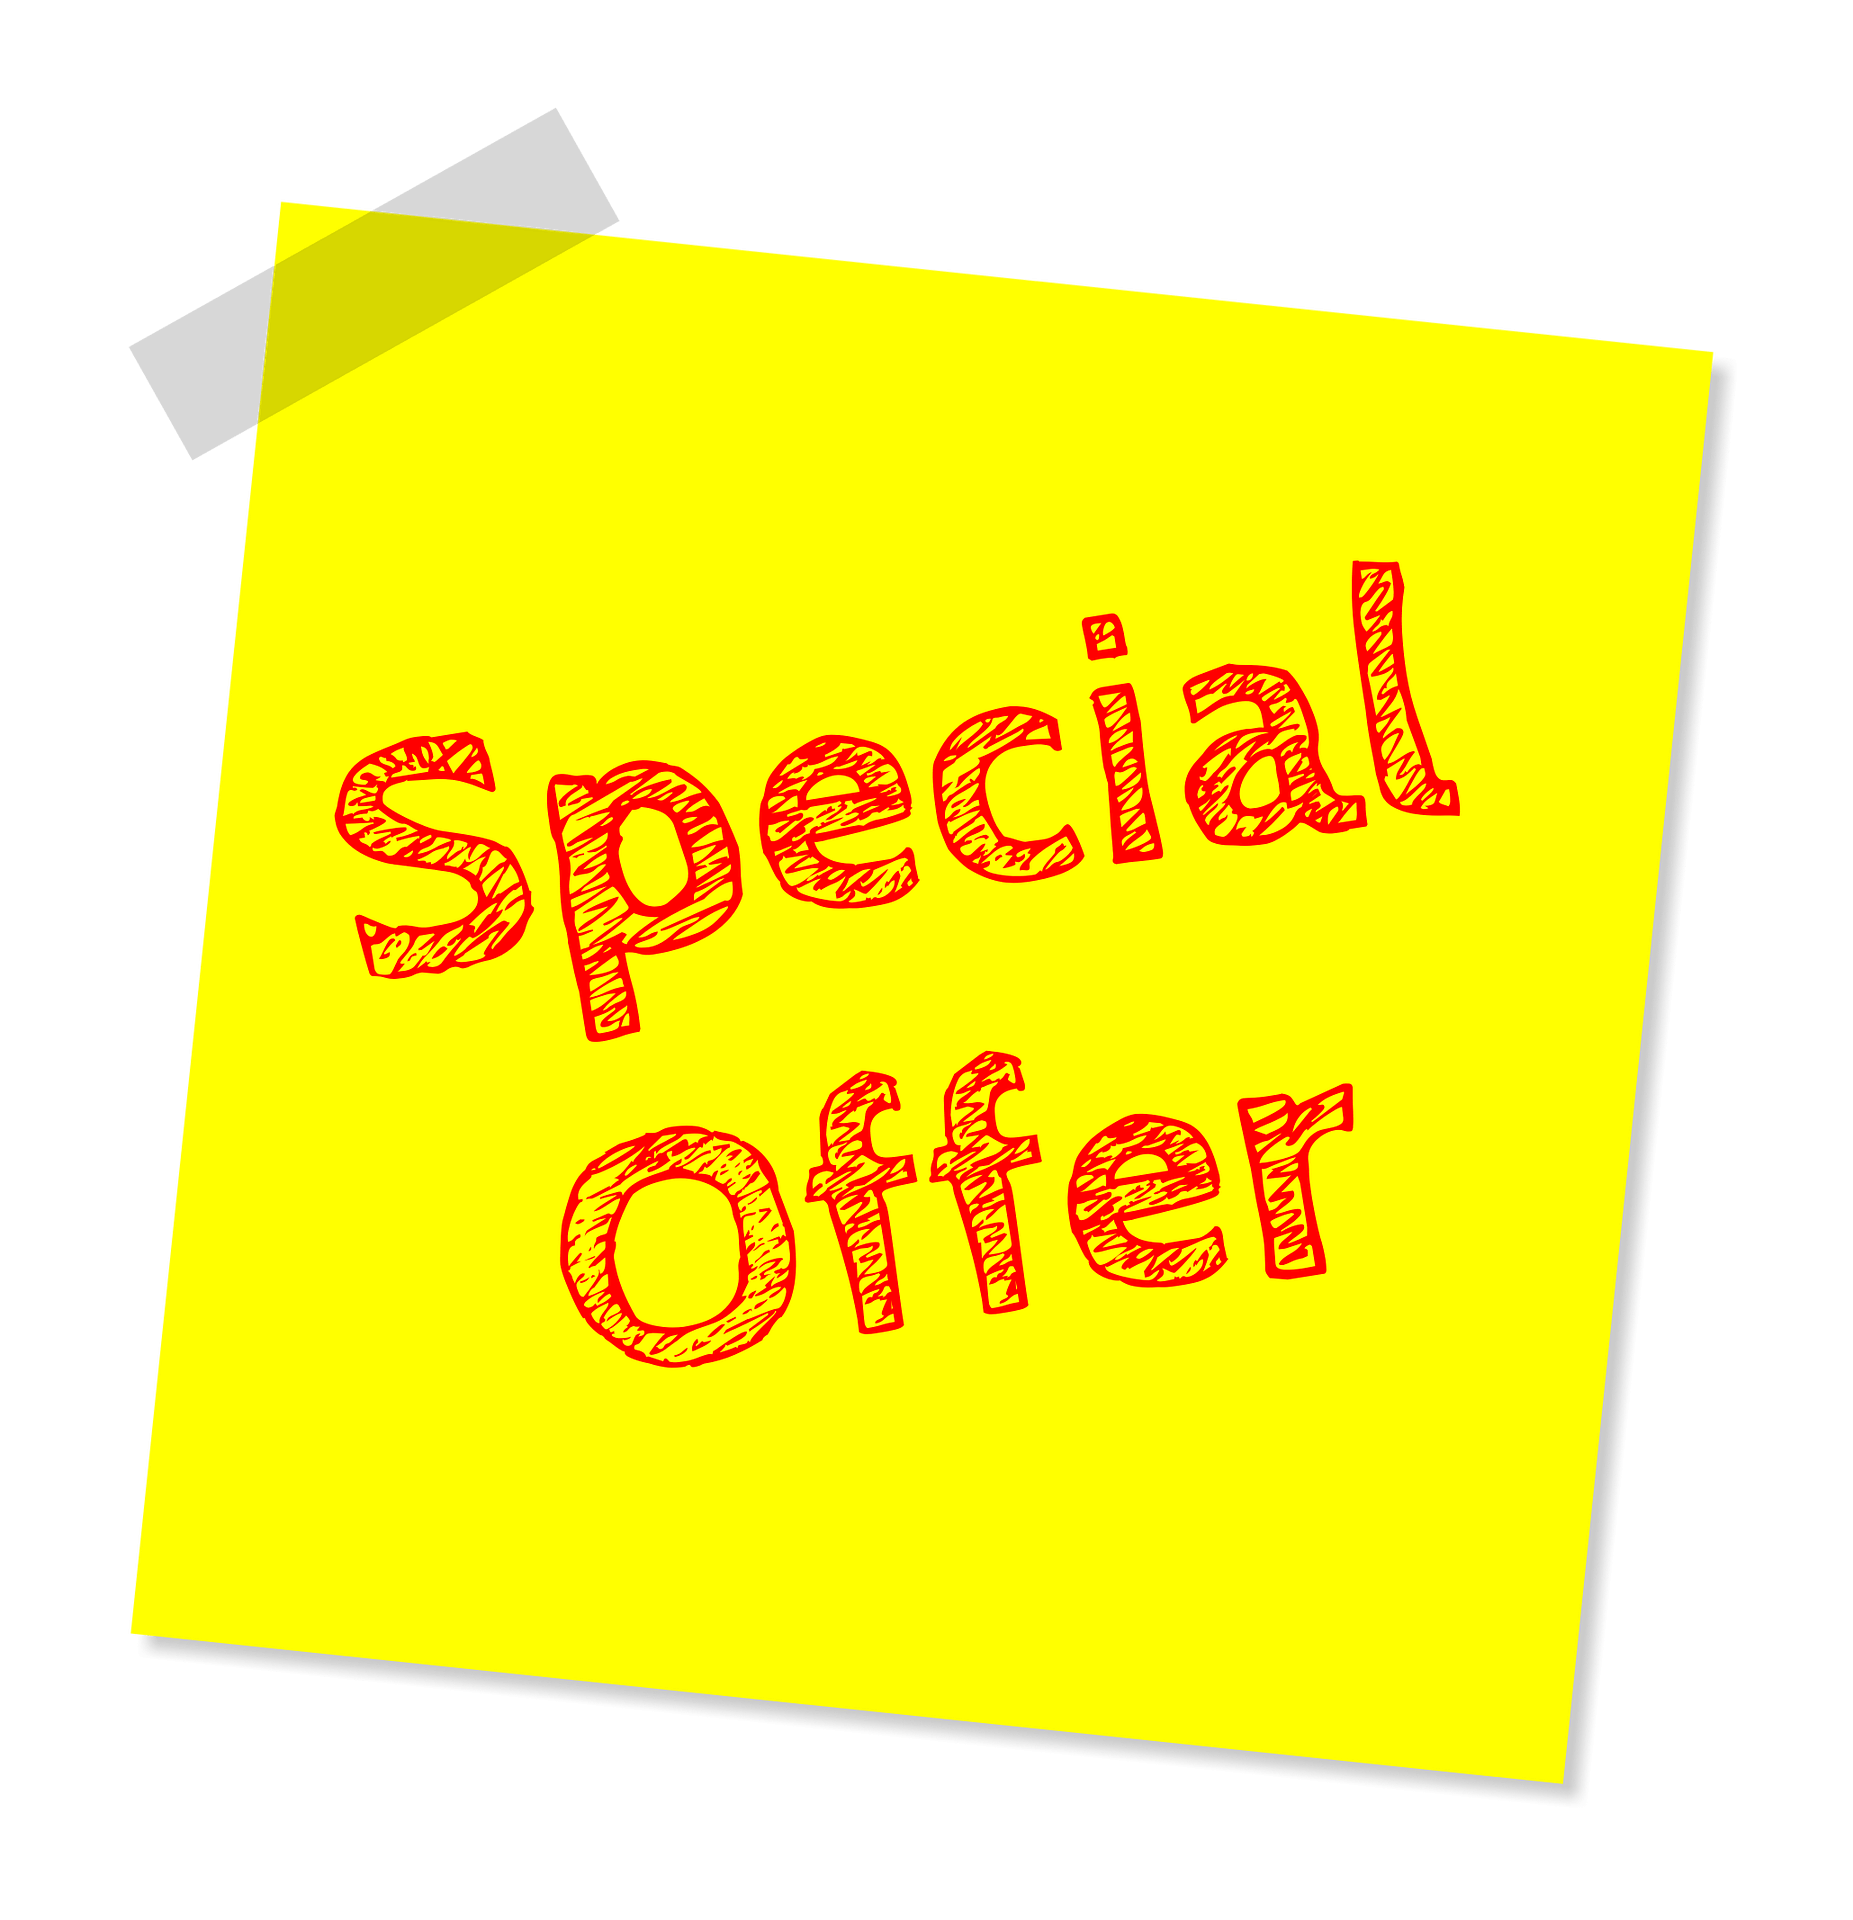 A yellow sticky note having the words *Special offer* written on it in red color.